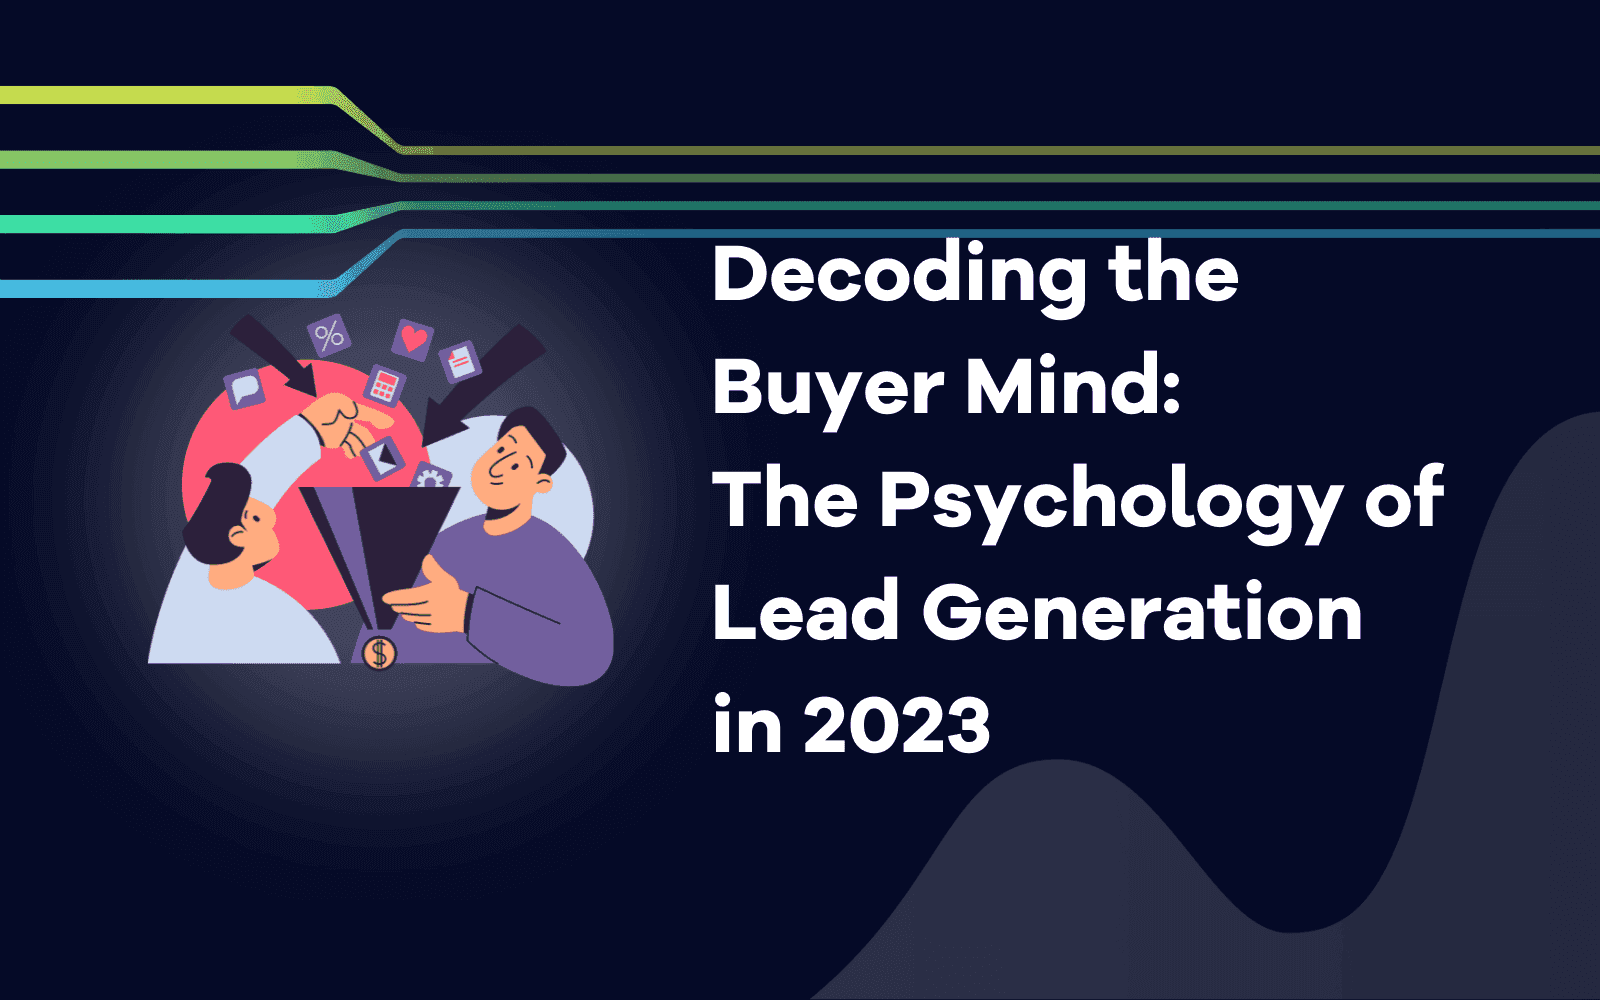 Decoding the Buyer Mind: The Psychology of Lead Generation in 2023